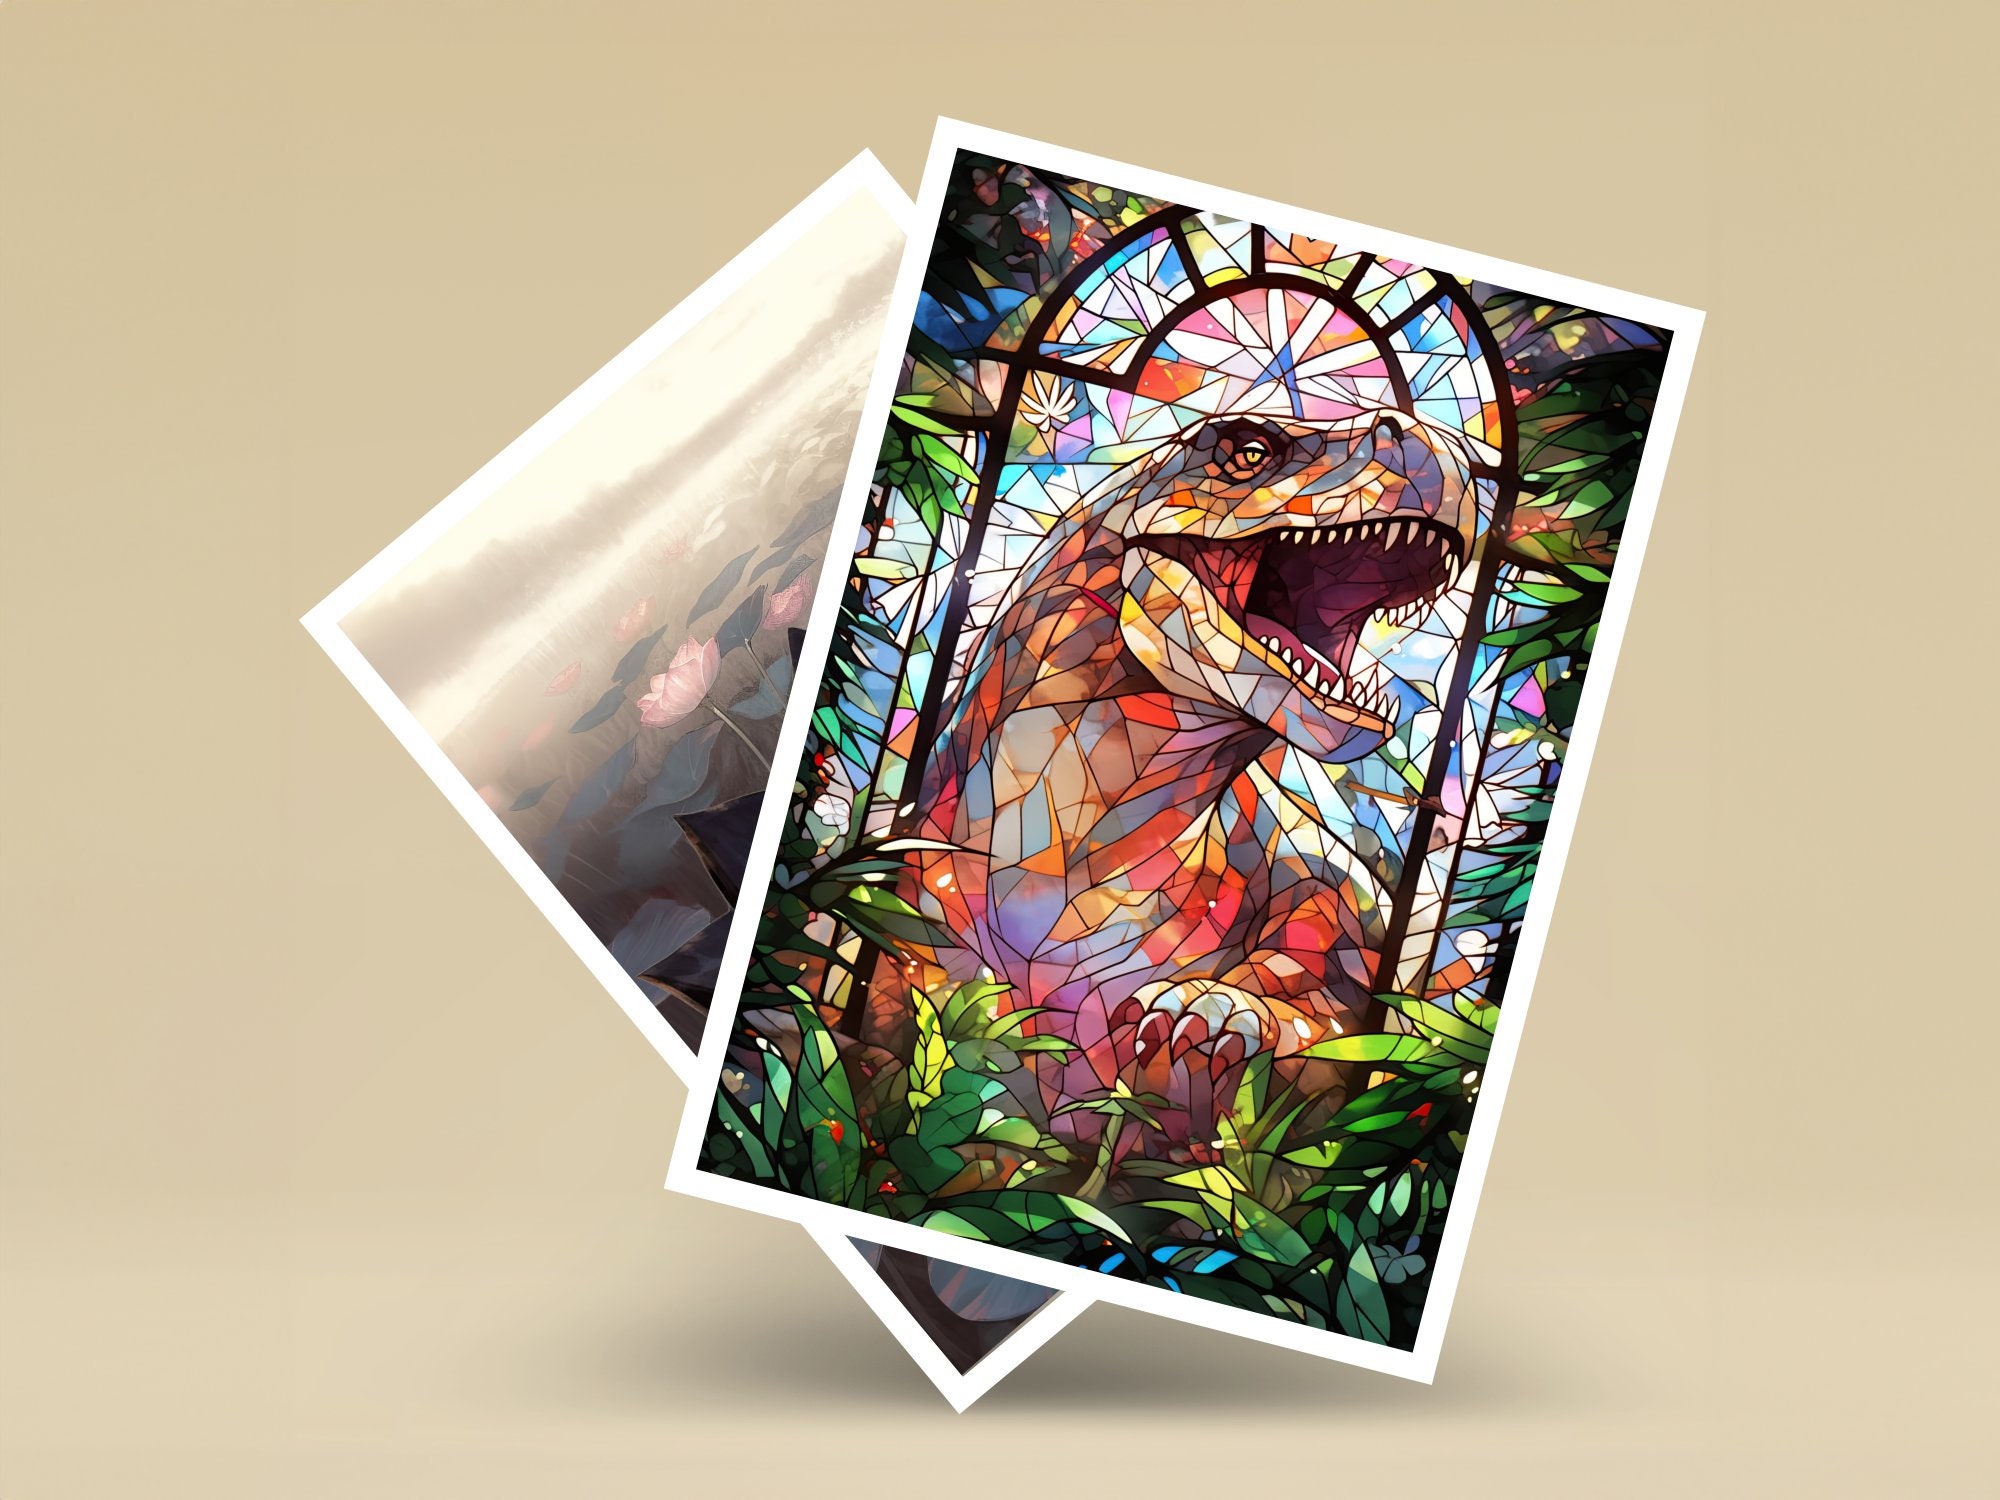 MTG Card Sleeves: Stain Glass Ver. Swamp